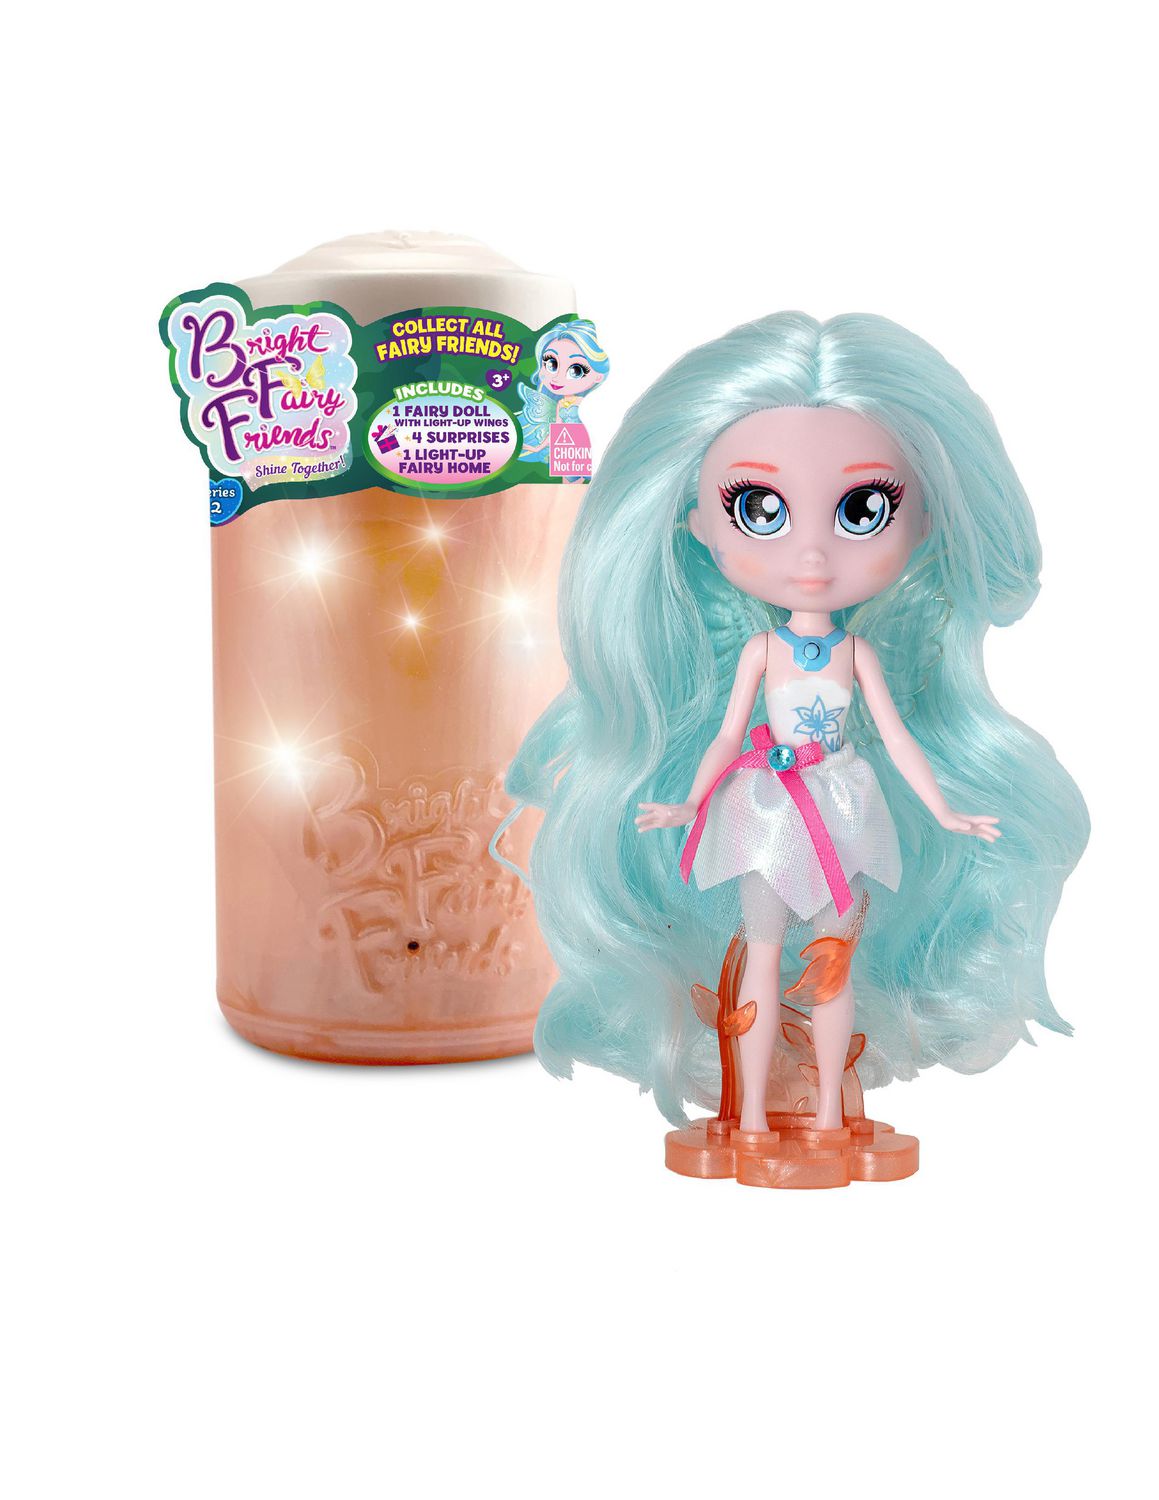 BFF Bright Fairy Friends Dolls From Funrise Styles May Vary Doll 4 Surprises for sale online